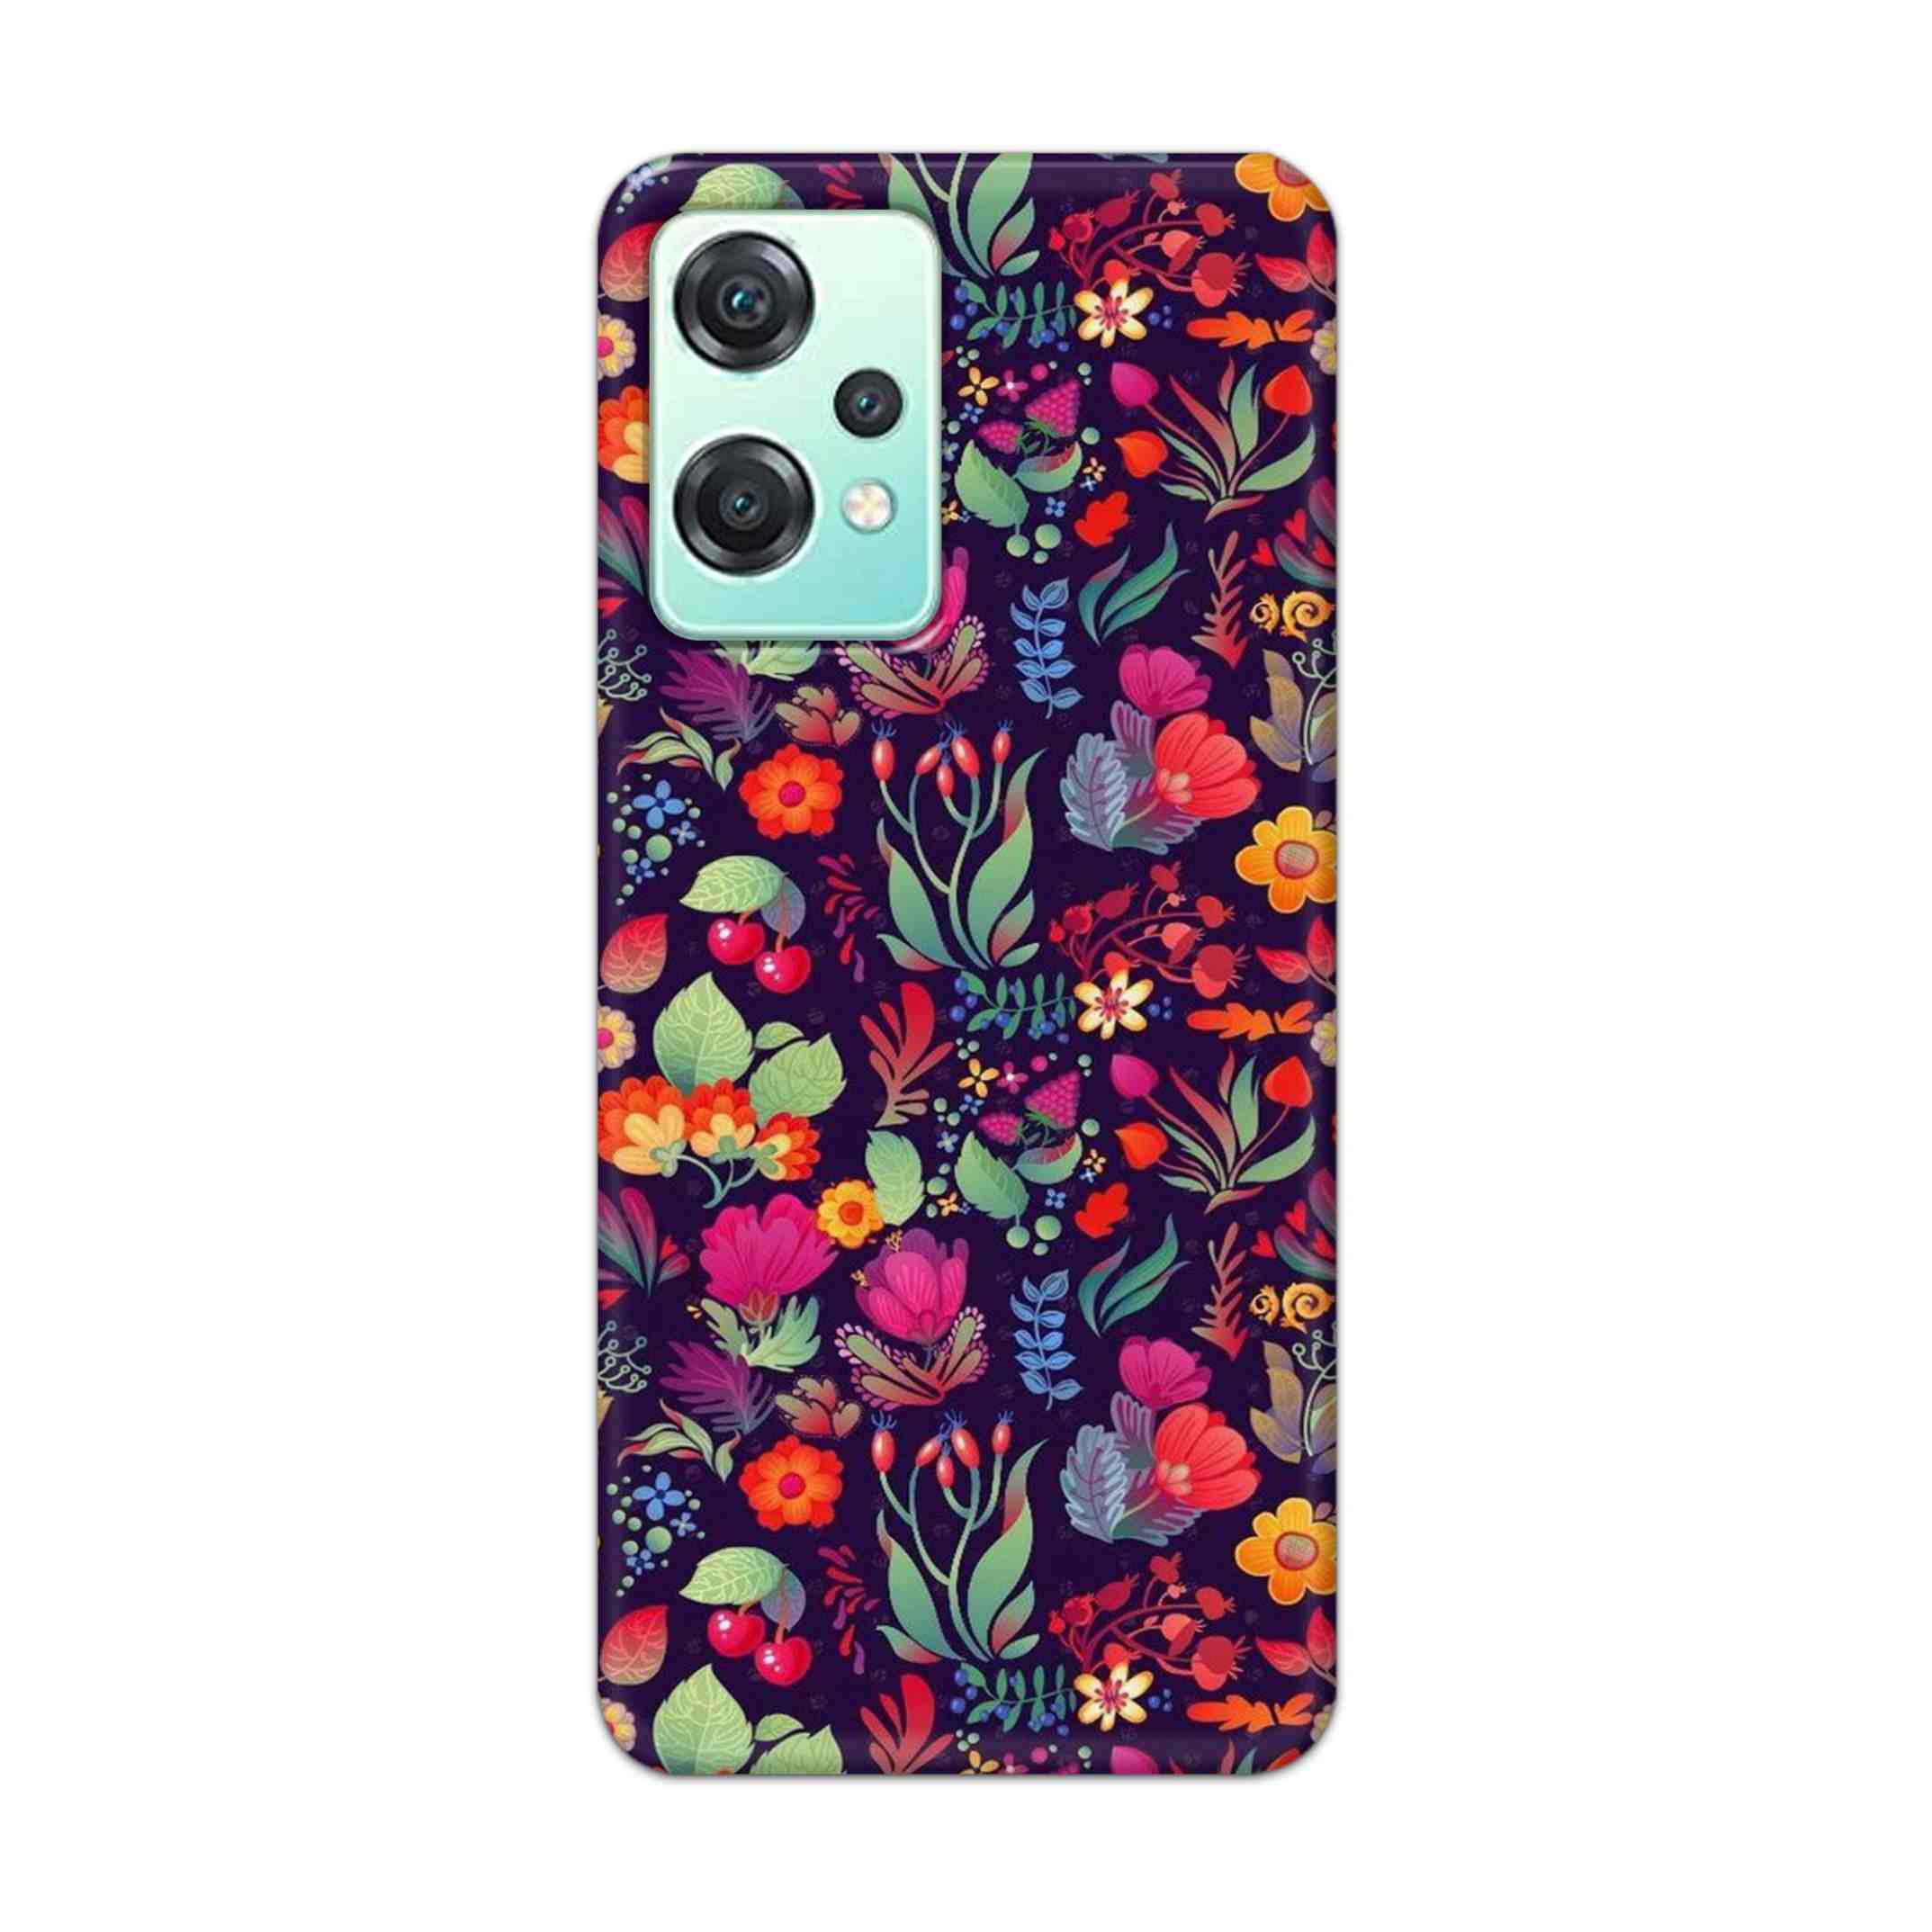 Buy Fruits Flower Hard Back Mobile Phone Case Cover For OnePlus Nord CE 2 Lite 5G Online